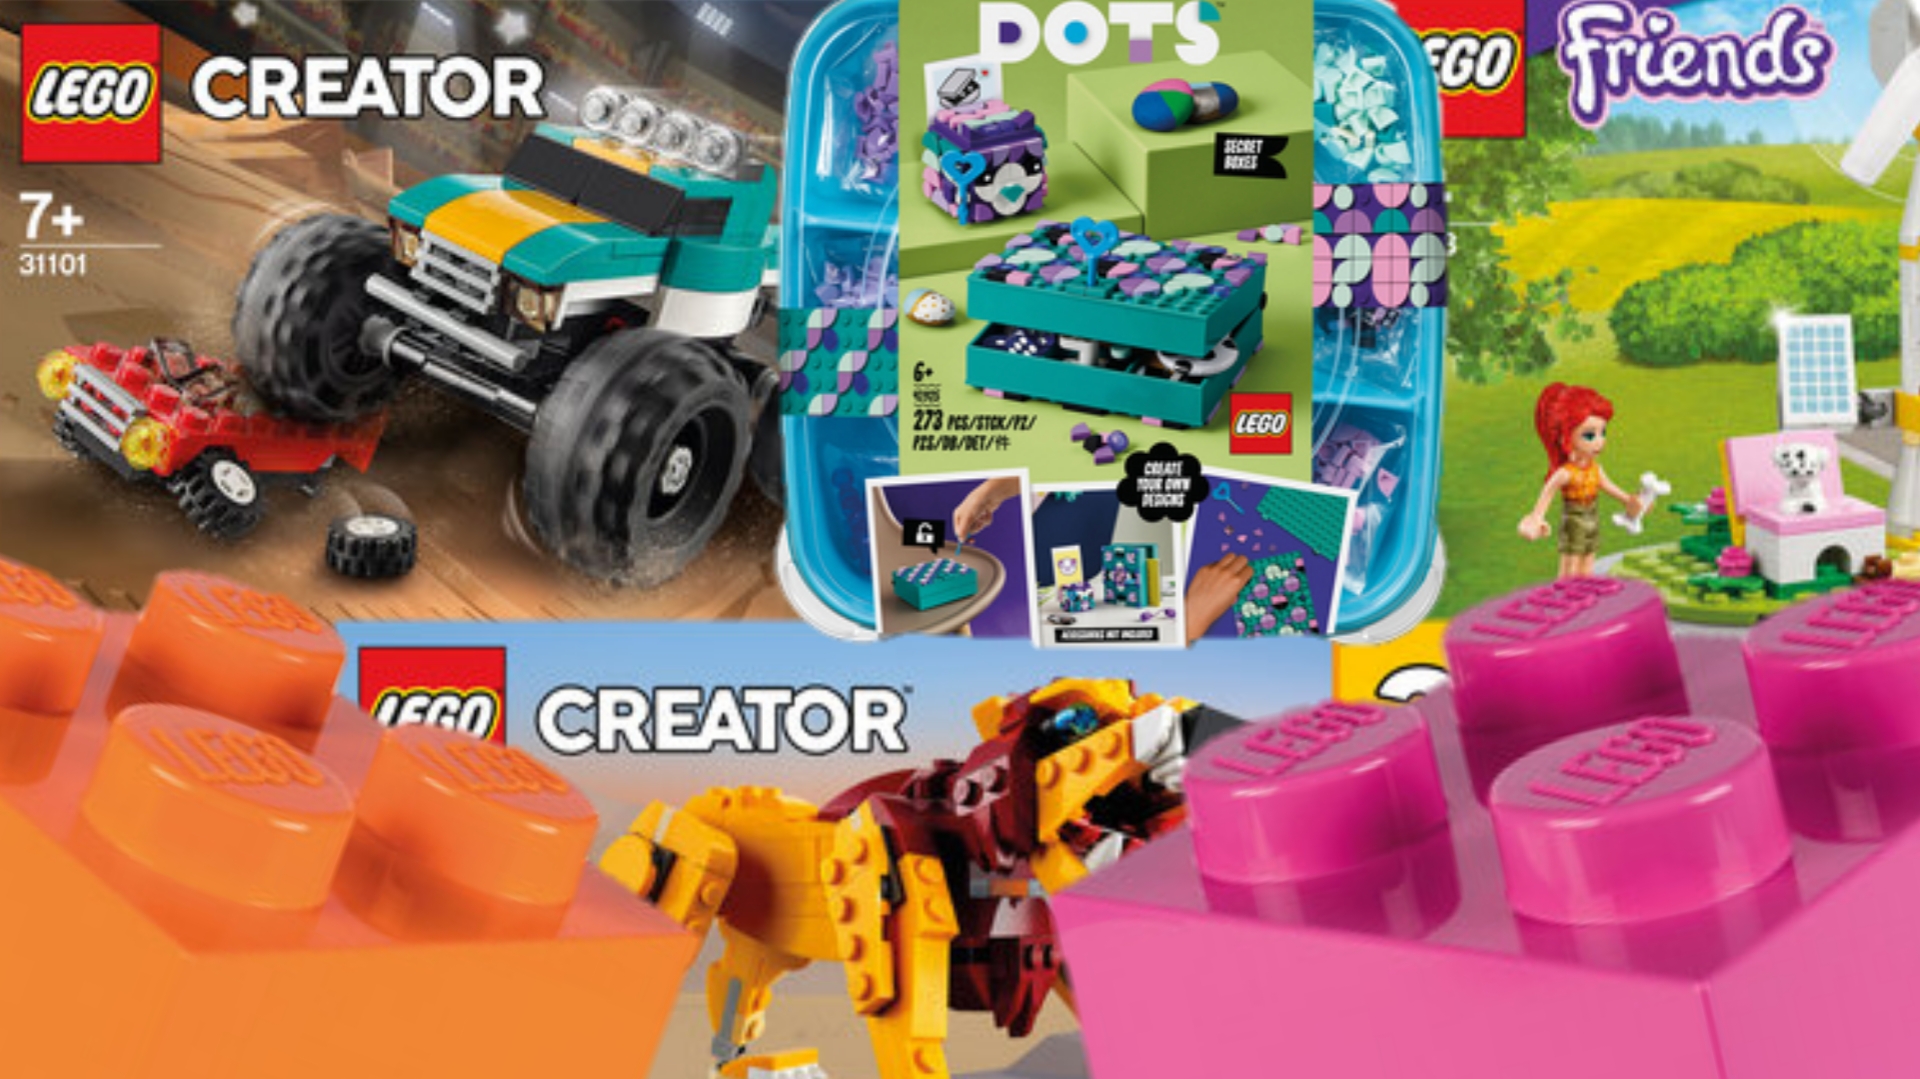 Mening baas tempo LEGO Sets & Storage Boxes at Lidl 26th August 2021! – The Brick Post!